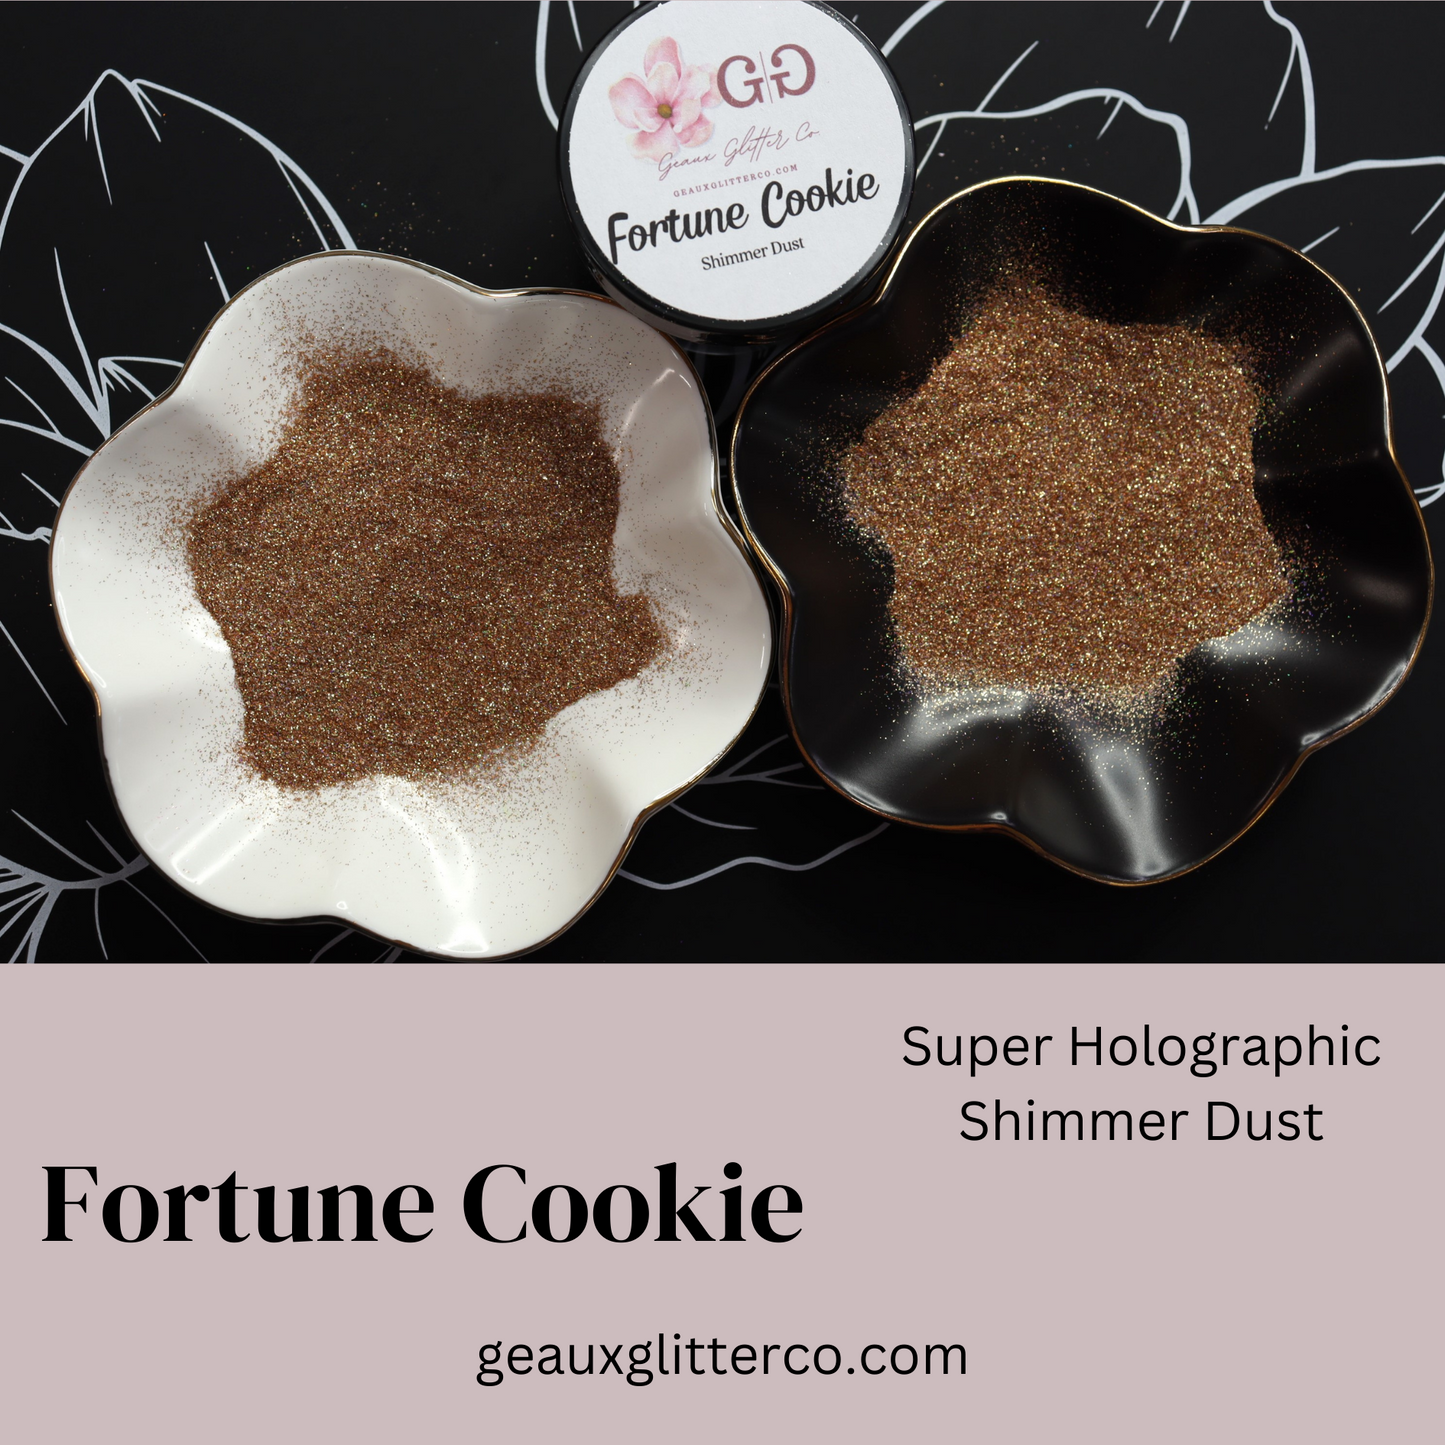 Fortune Cookie Super Holographic Shimmer Dust